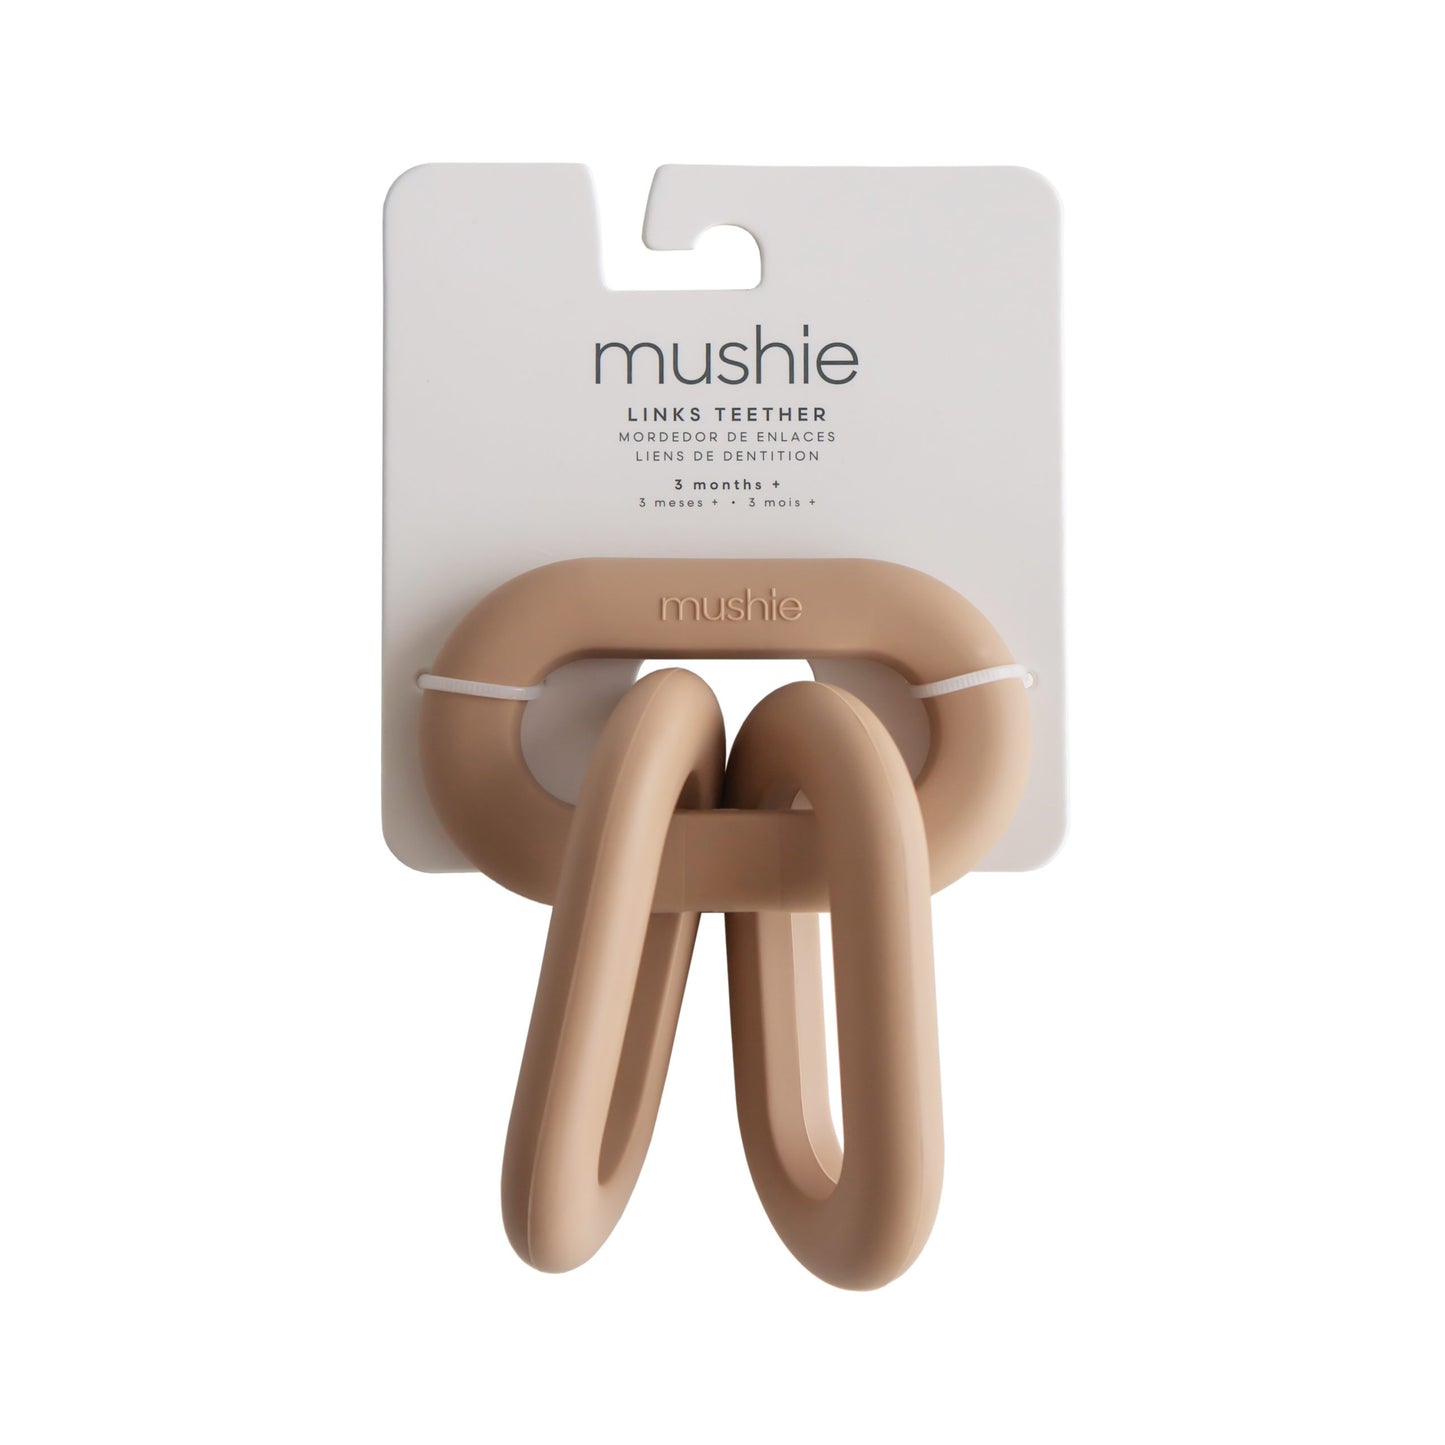 💗 NEW MUSHIE 💗 Link Teether